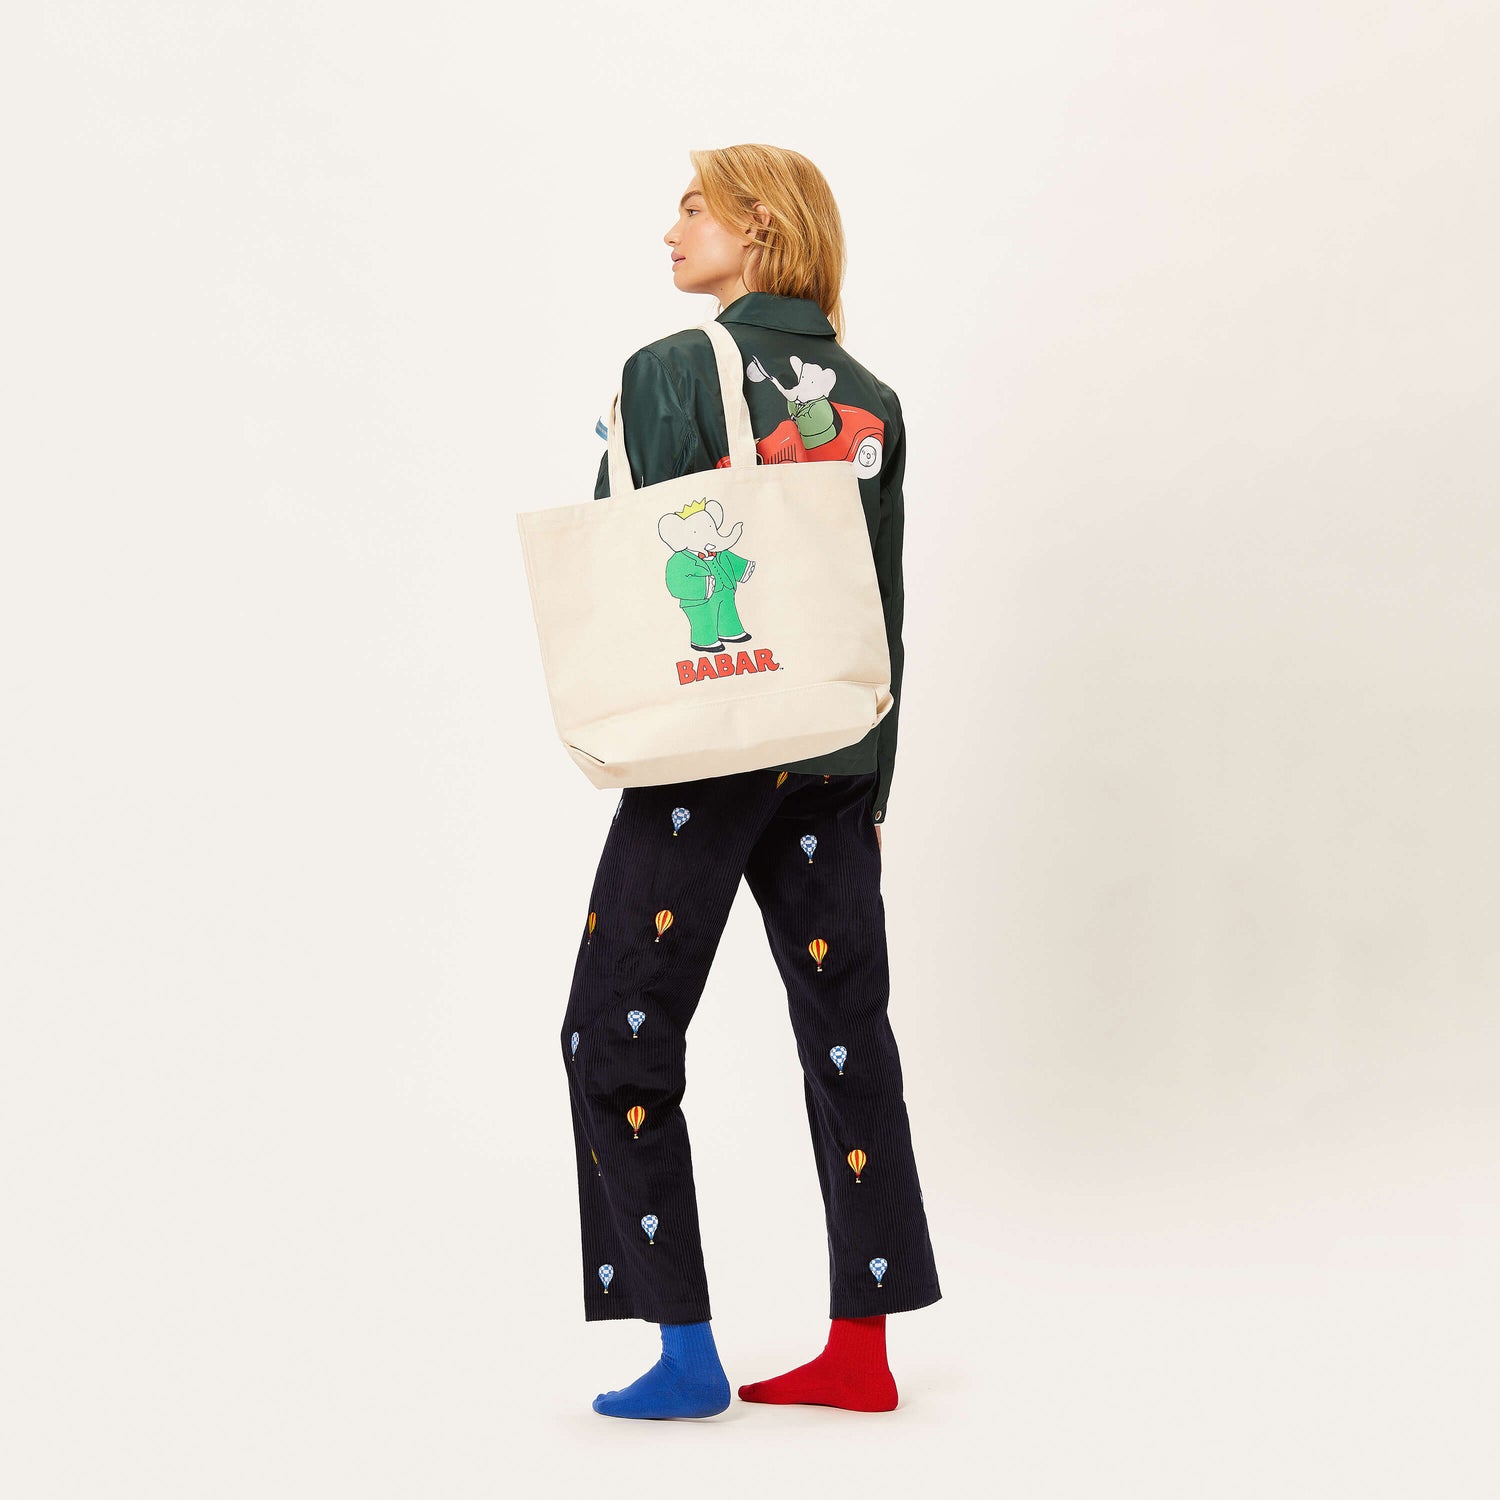 Female model holding the Babar Tote.